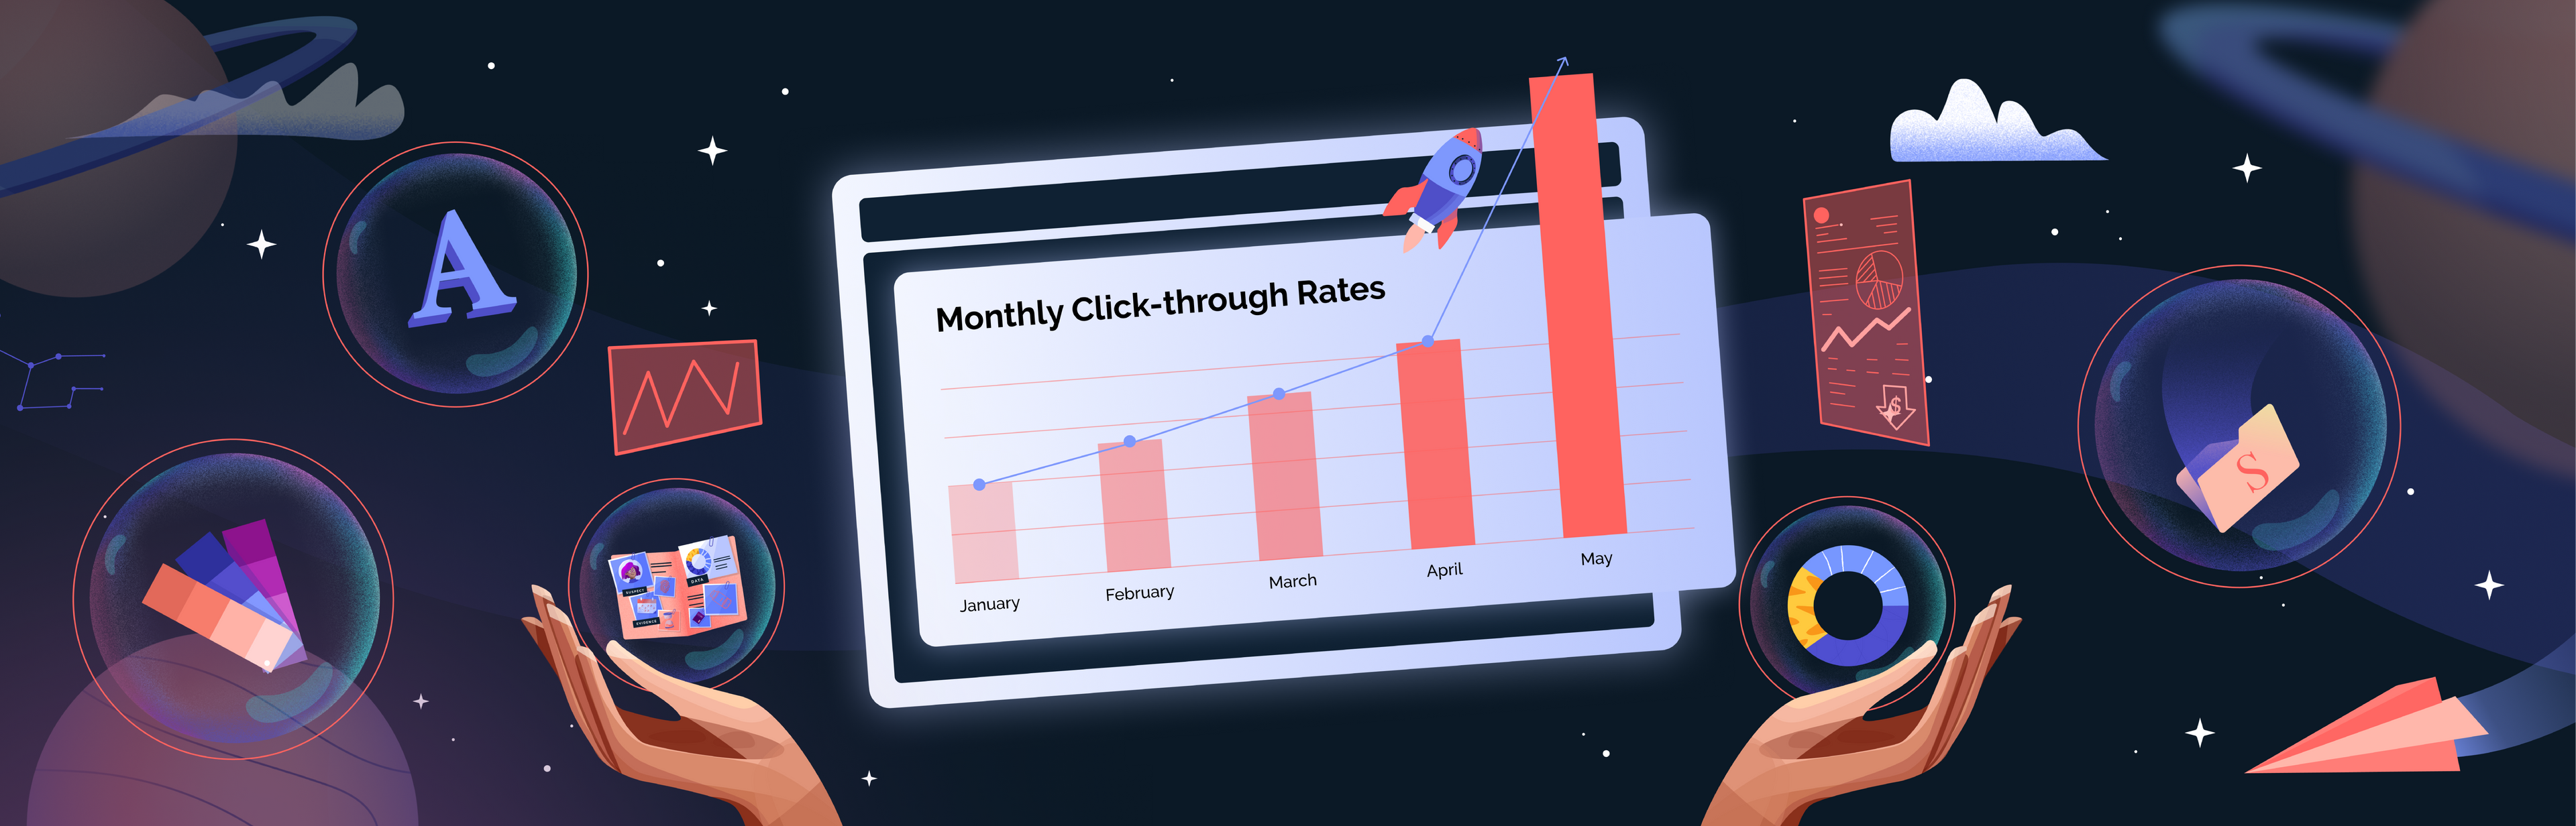 2 Design Tactics to Triple Your Click-Through Rate Right Now